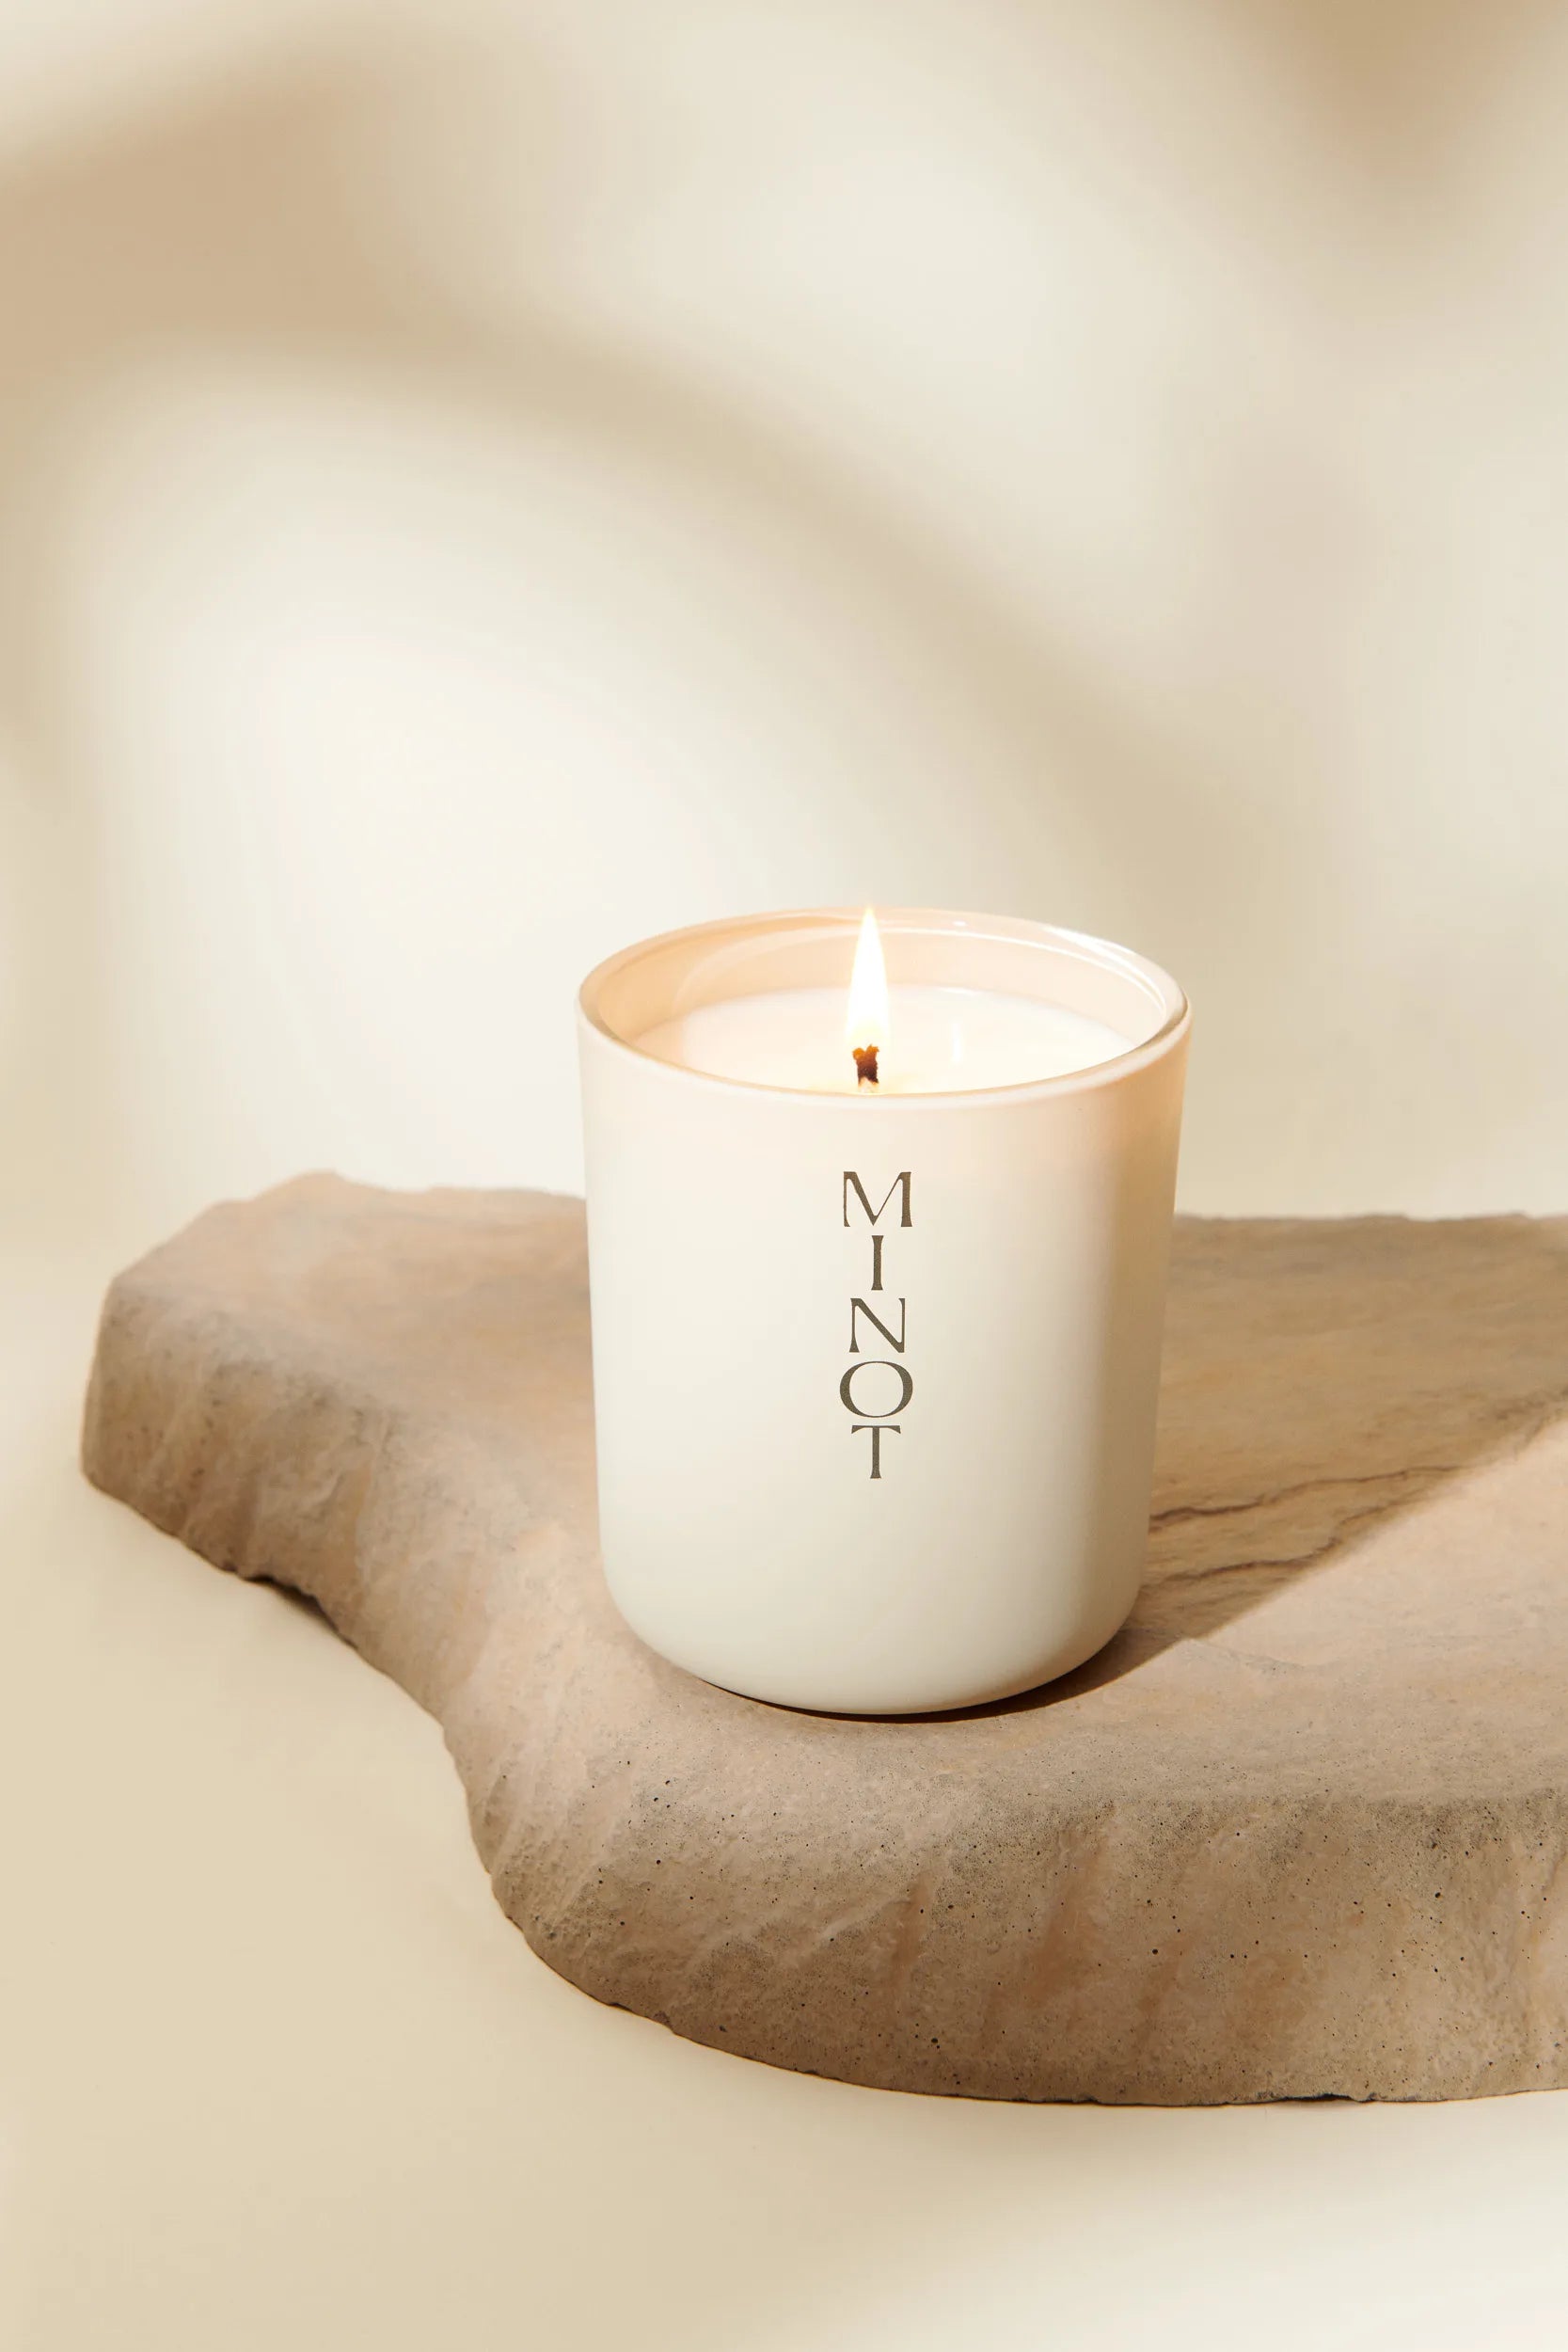 Dusk is a clean-burning candle made with non-toxic, ethical ingredients like soy wax and cotton wick